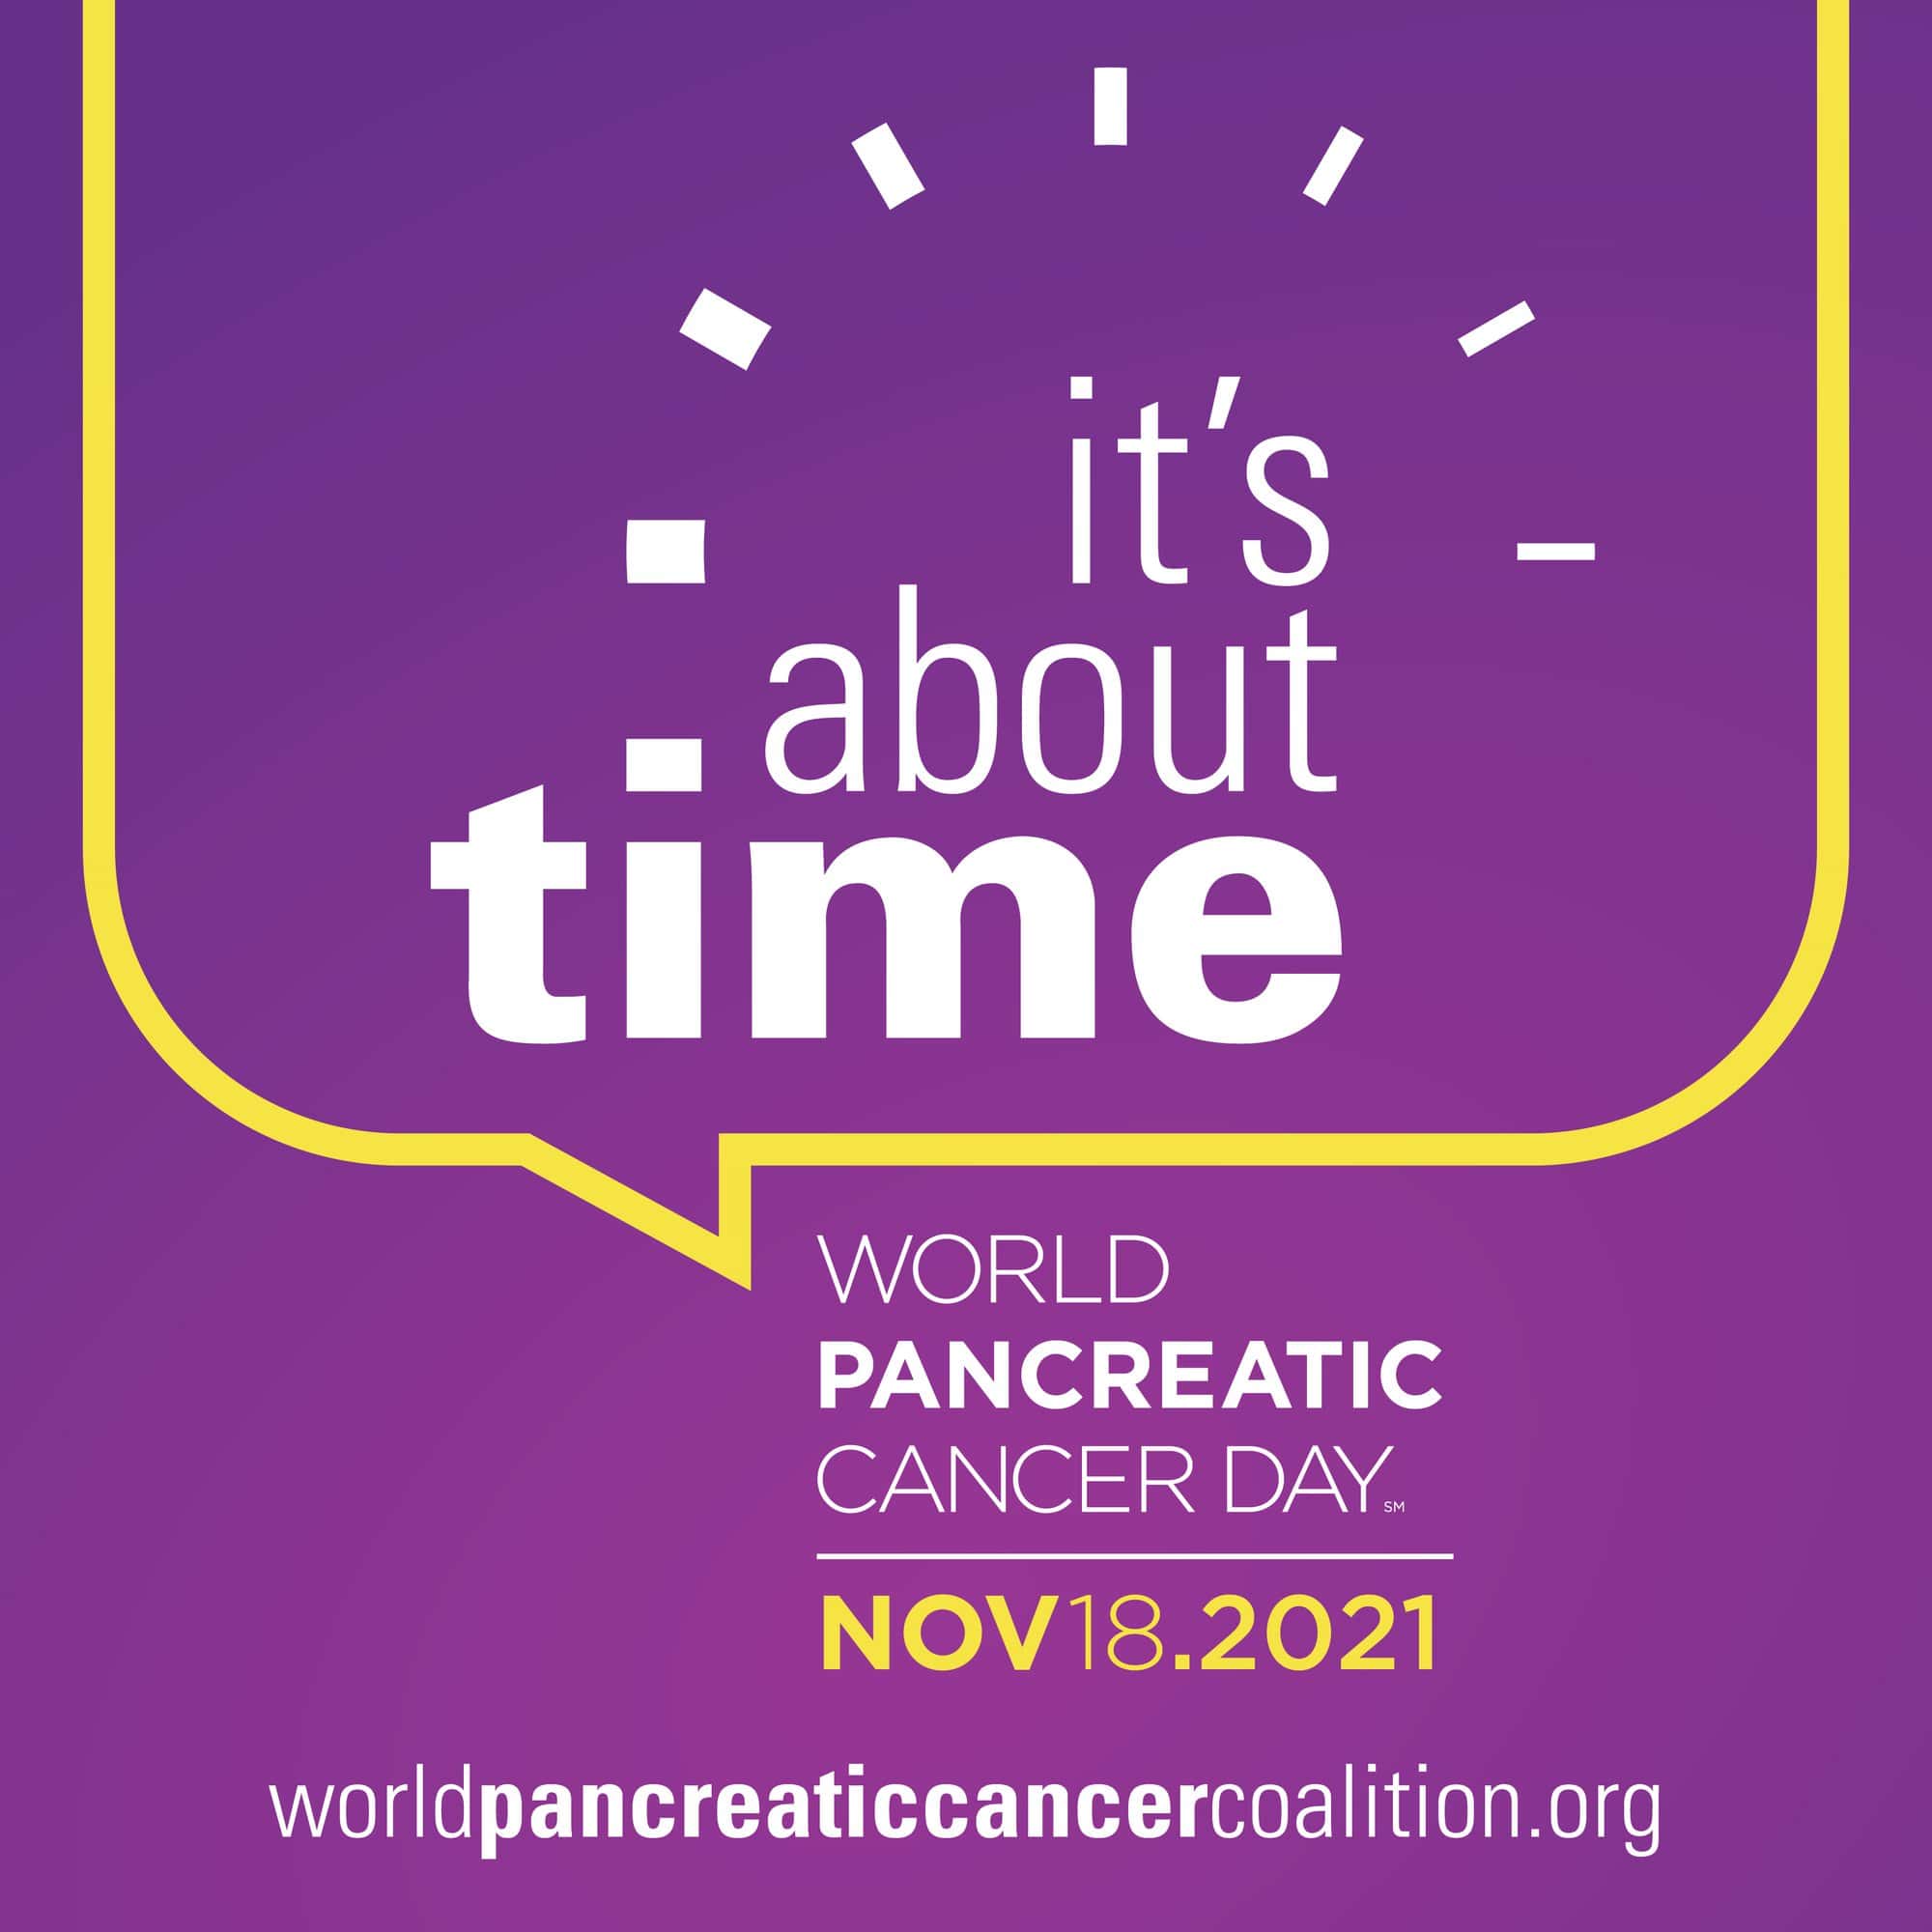 Join Us to Raise Awareness of Pancreatic Cancer on November 18